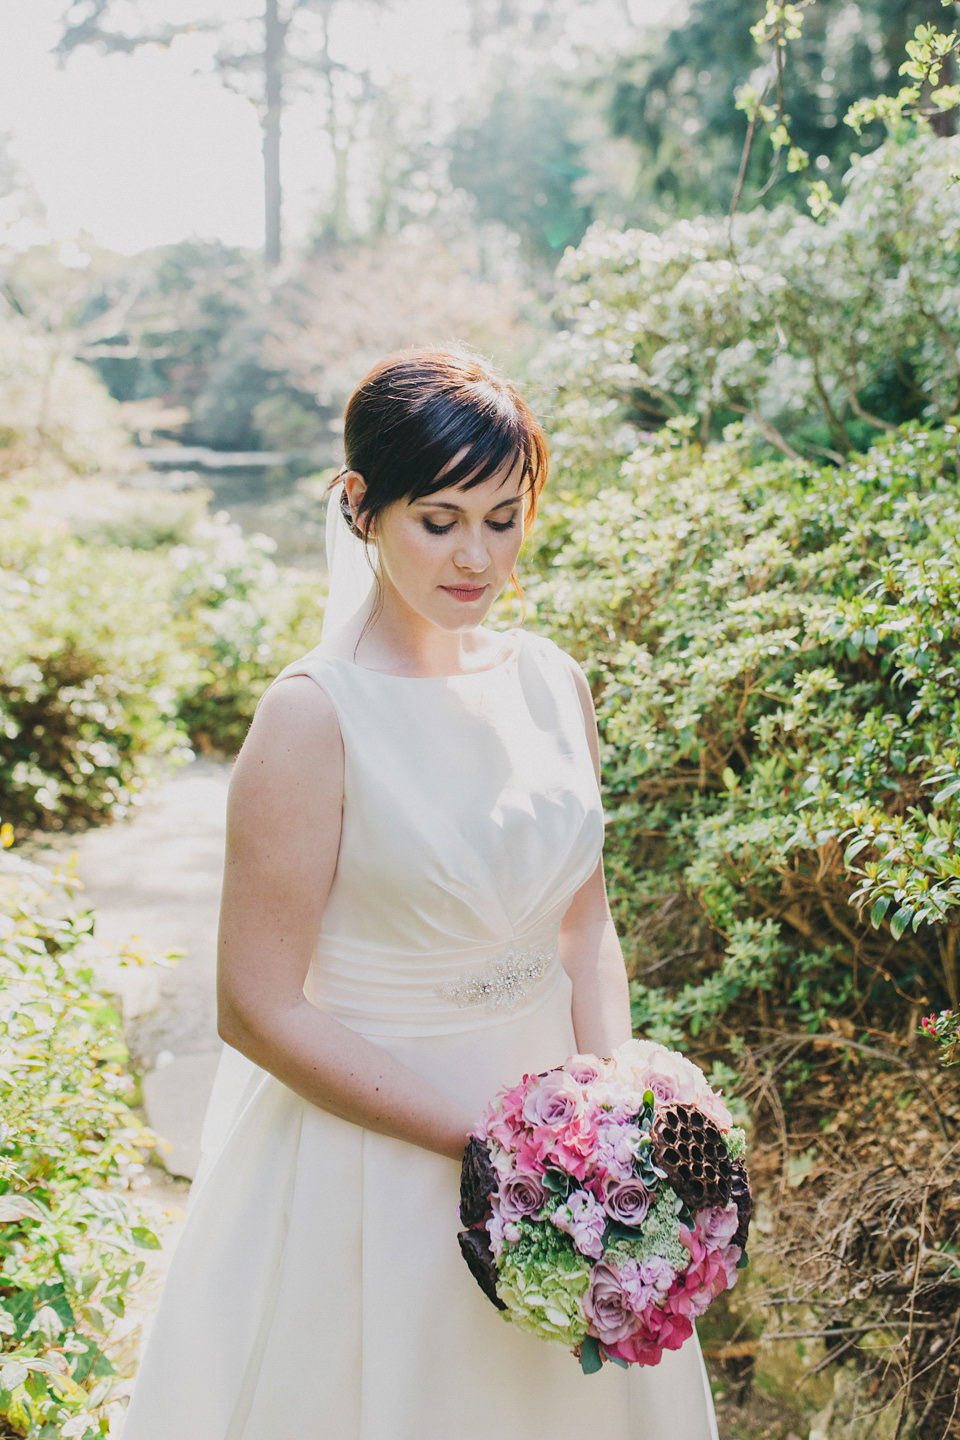 A Pronovias gown for a pastel colour Japanese garden wedding. Images by Peppermint Love Photography